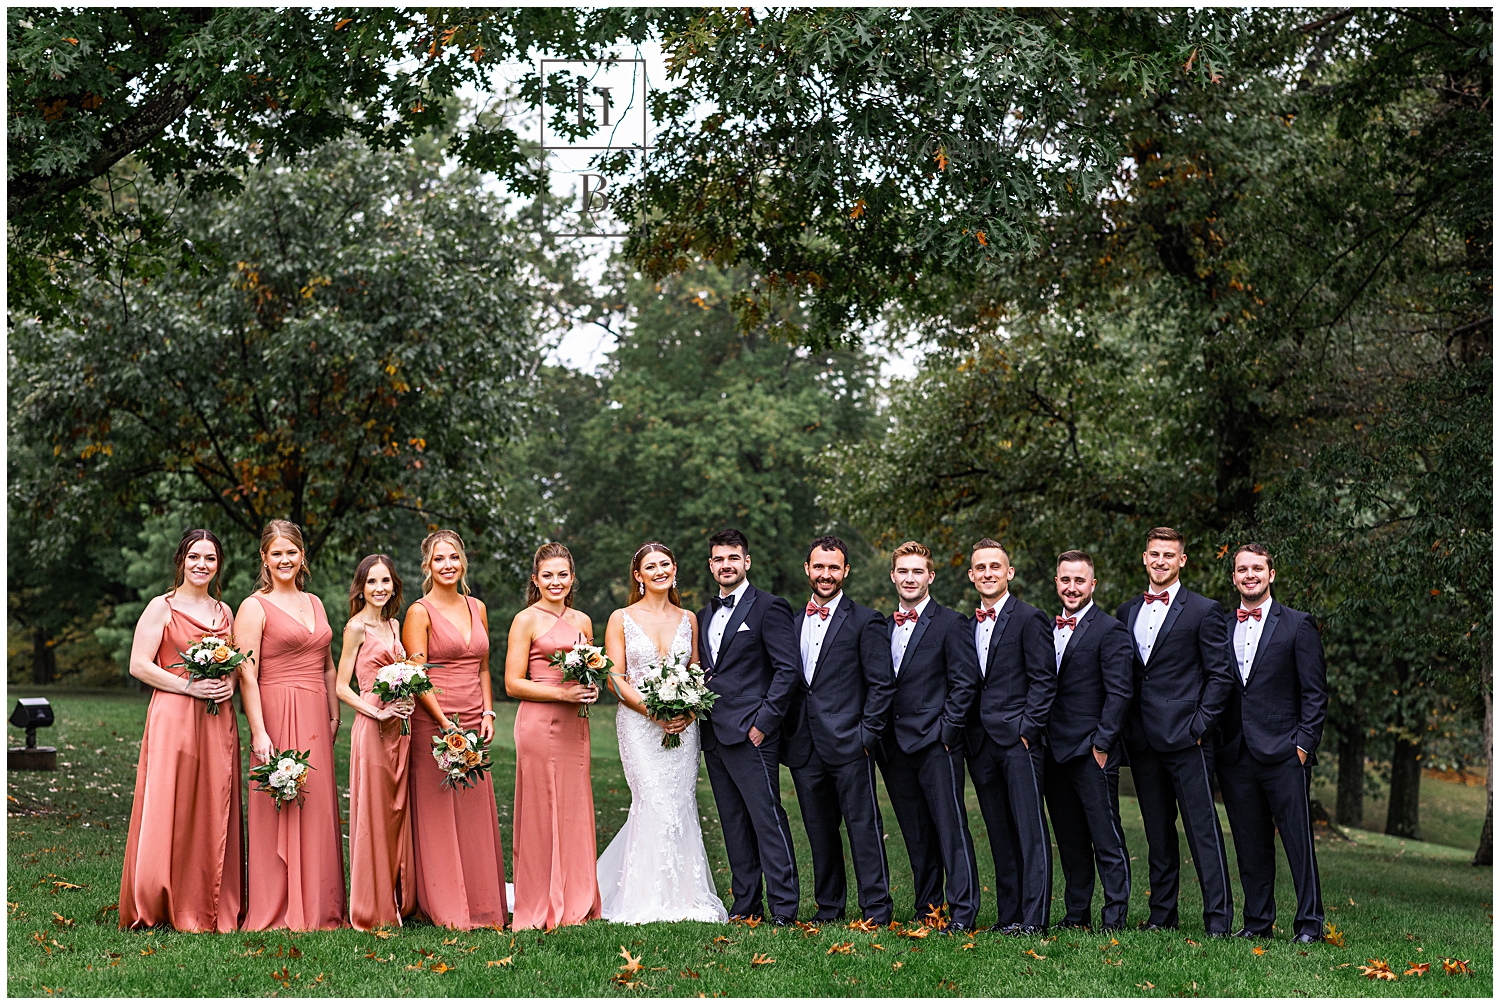 Bridesmaids in cedar rose dresses pose with groomsmen in black tuxes for bridal party photo.